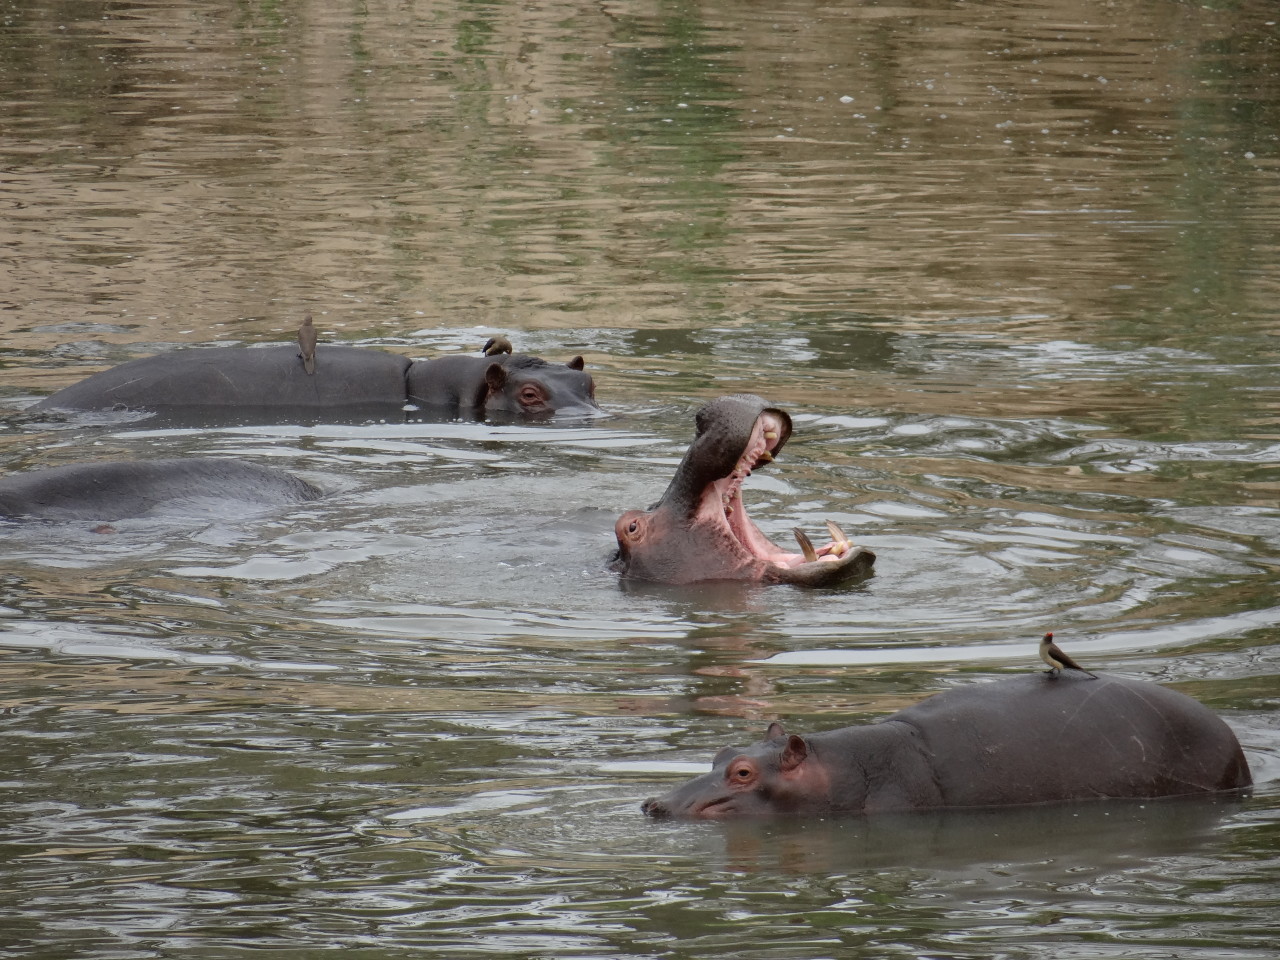 Hippo yawning in South Africa